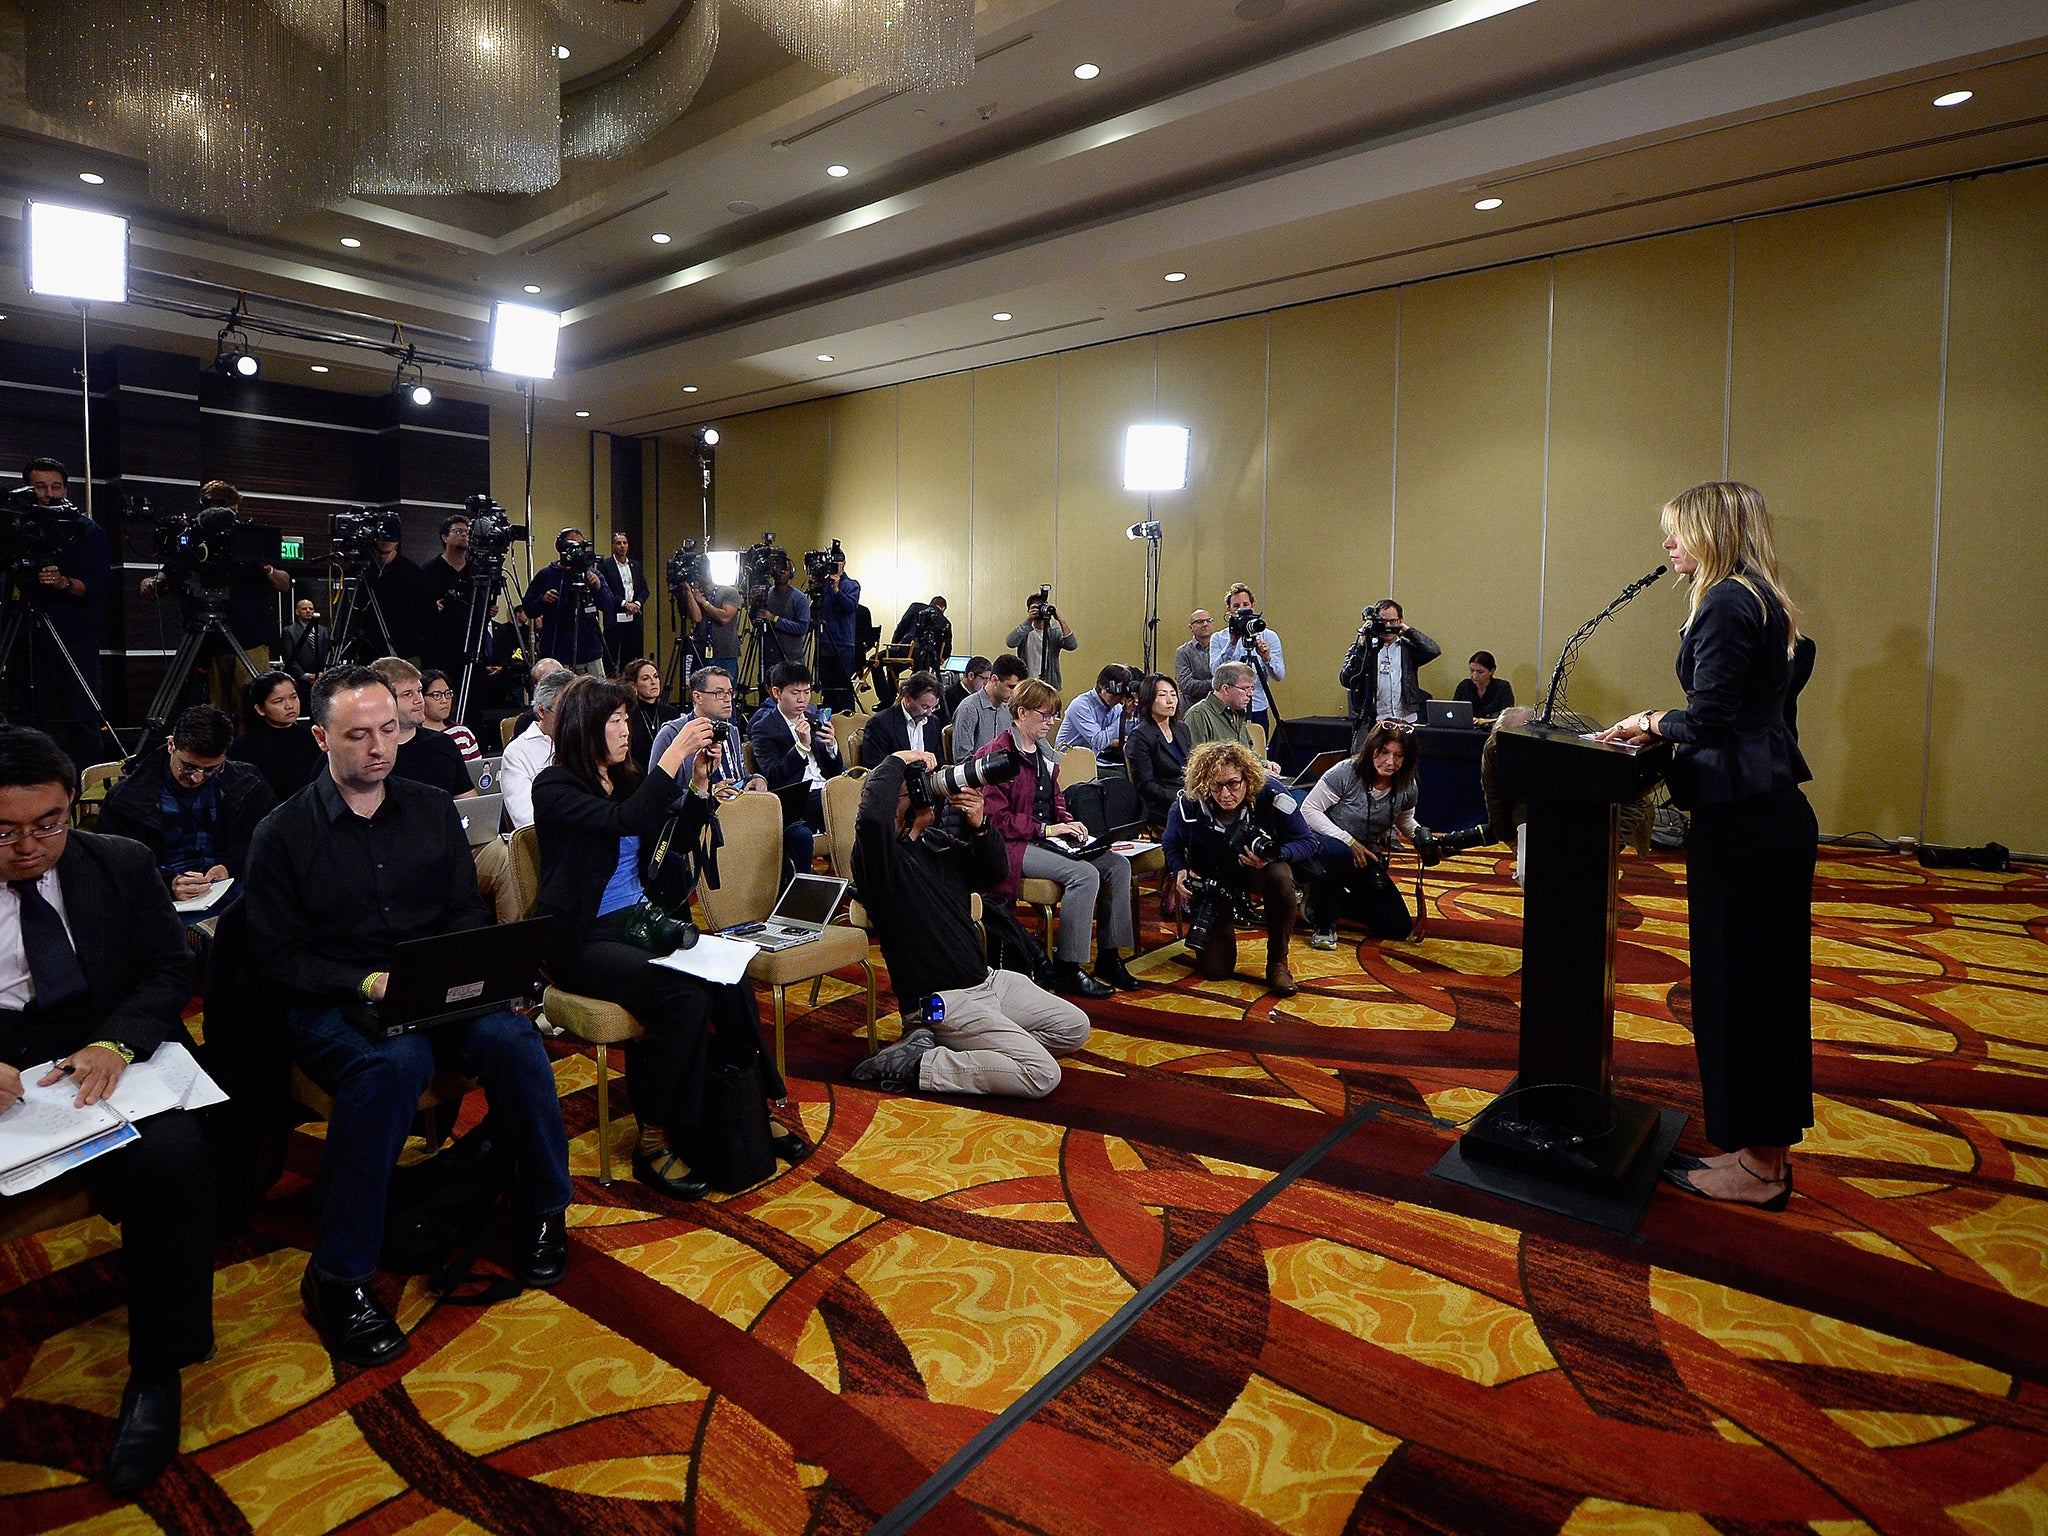 Maria Sharapova speaking in front of the press on Monday